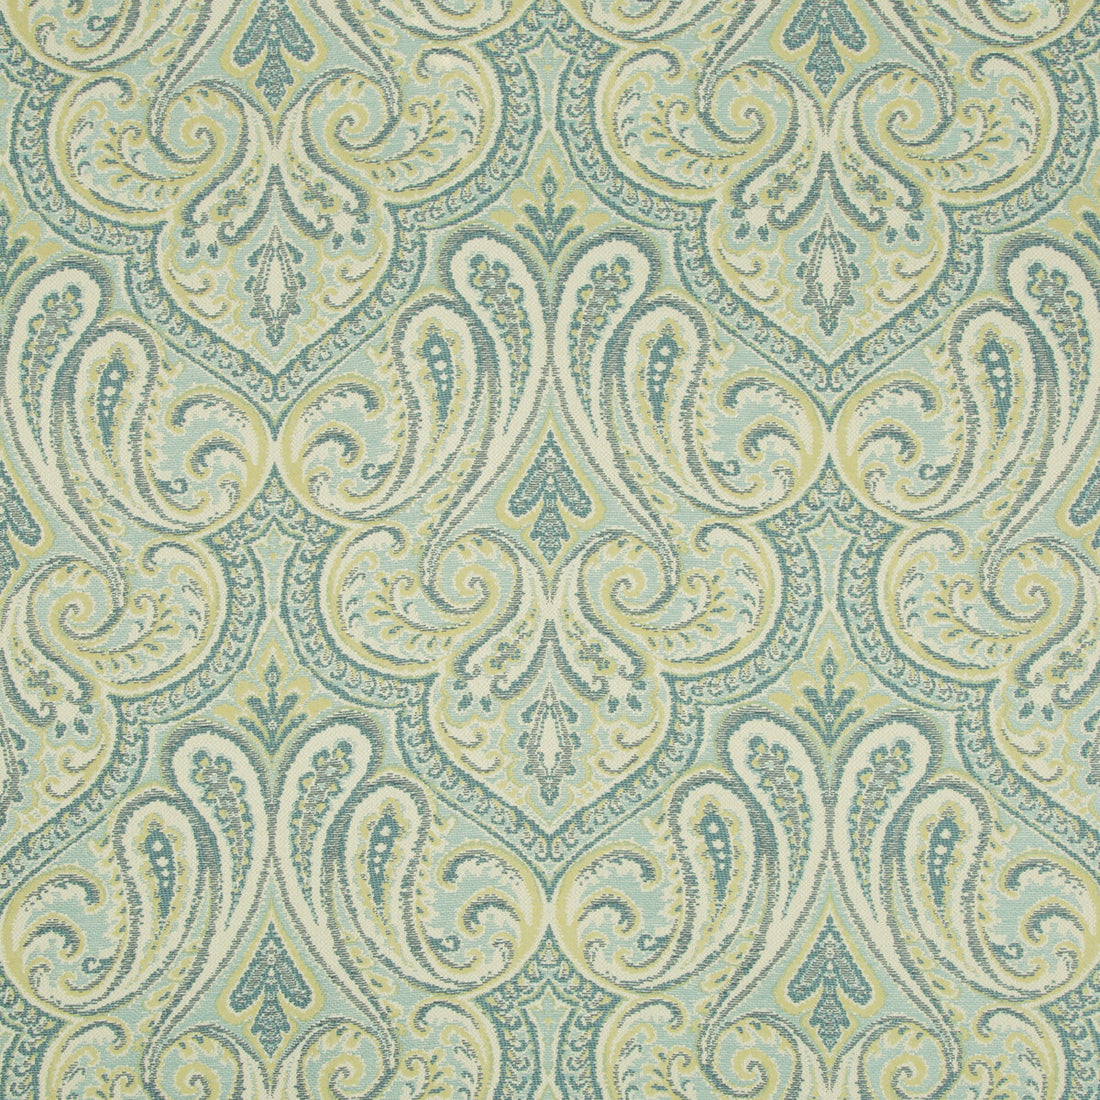 Kravet Design fabric in 34706-35 color - pattern 34706.35.0 - by Kravet Design in the Crypton Home collection